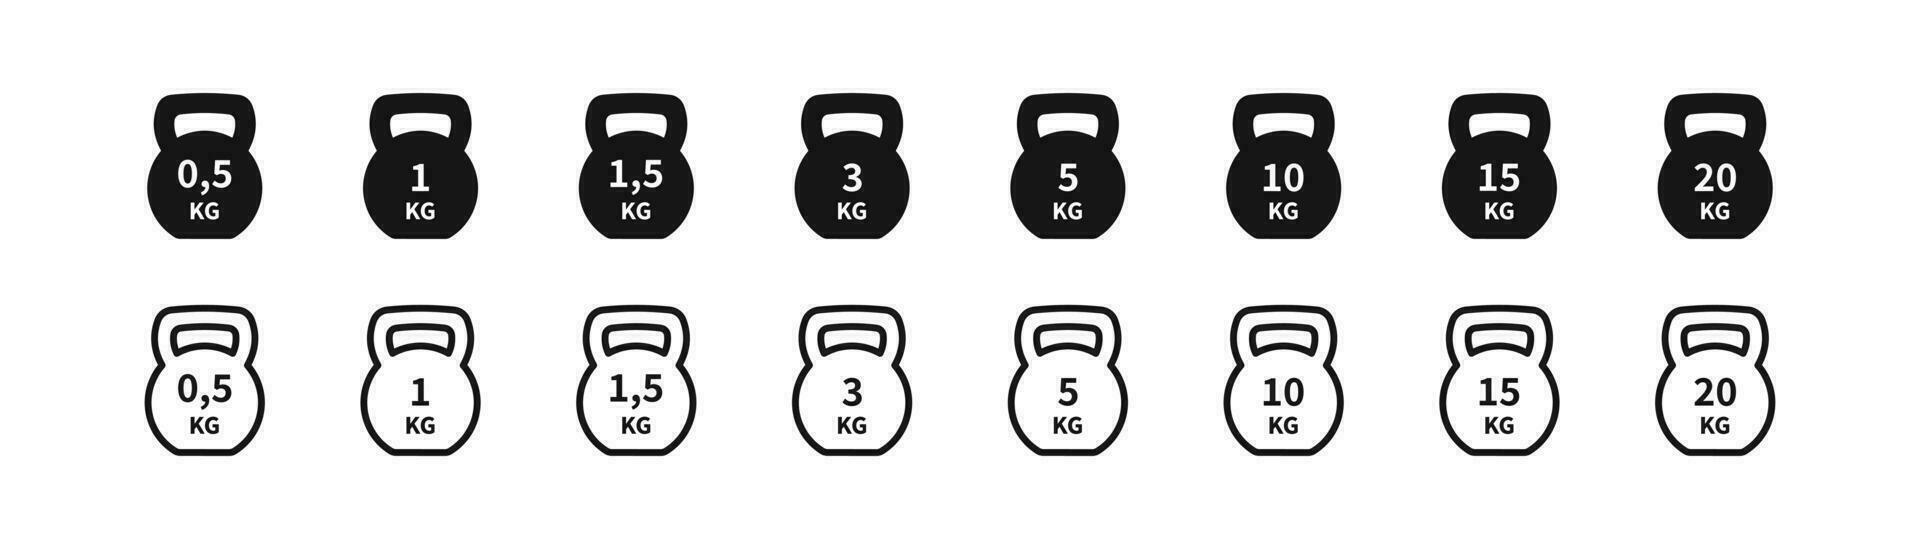 Kg weight icon. Heavy dumbbell symbol. Sports signs. Measure symbols. 0,5, 1, 1,5, 3, 5, 10, 15, 20 kilogram icons. Black color. Vector sign.